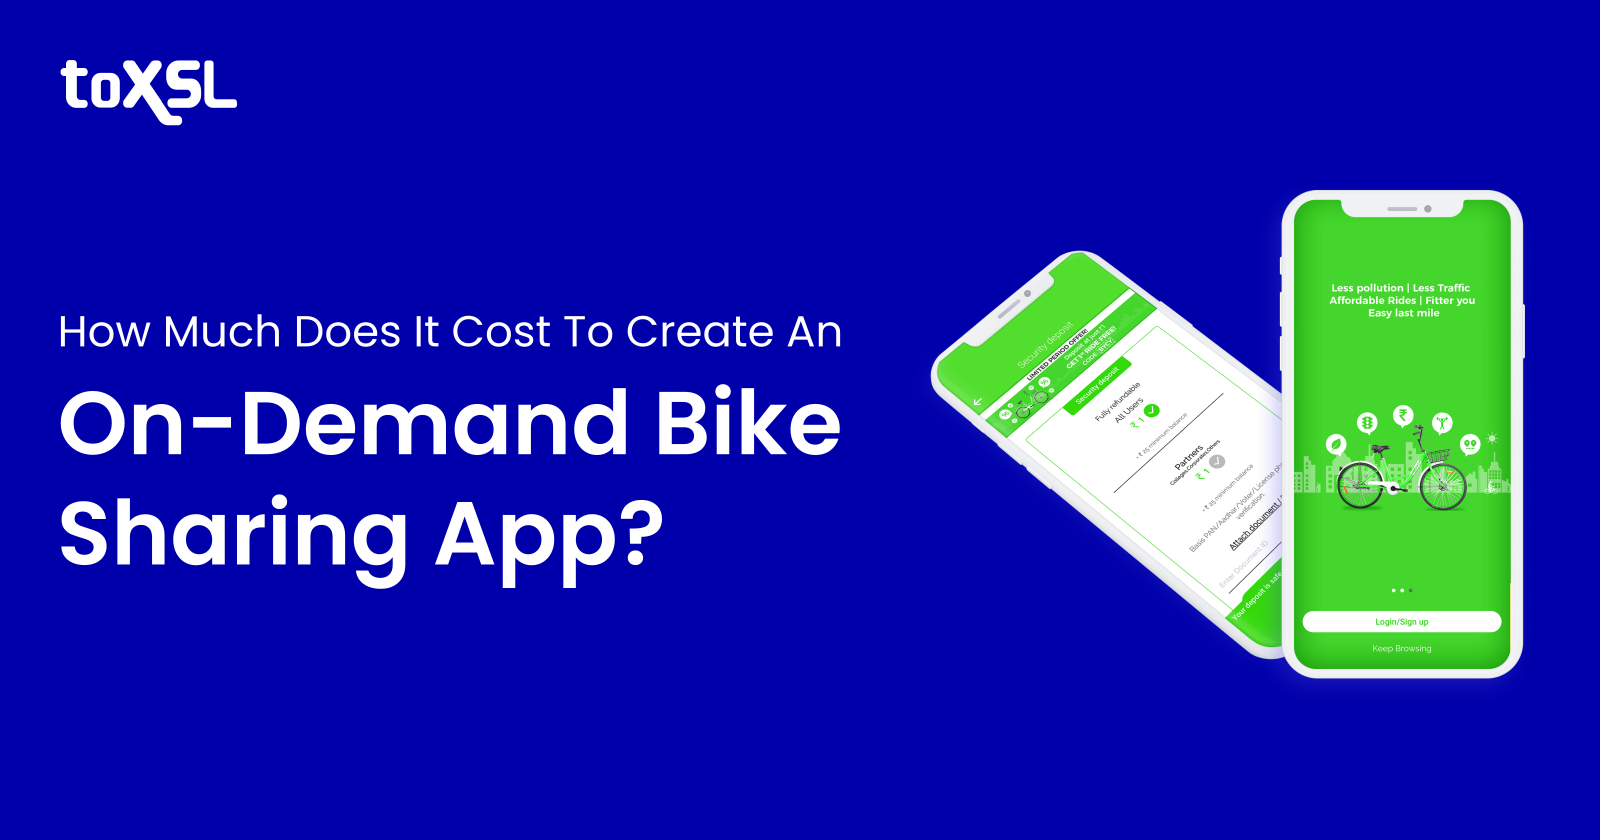 How Much Does It Cost To Create An On-demand Bike Sharing App?